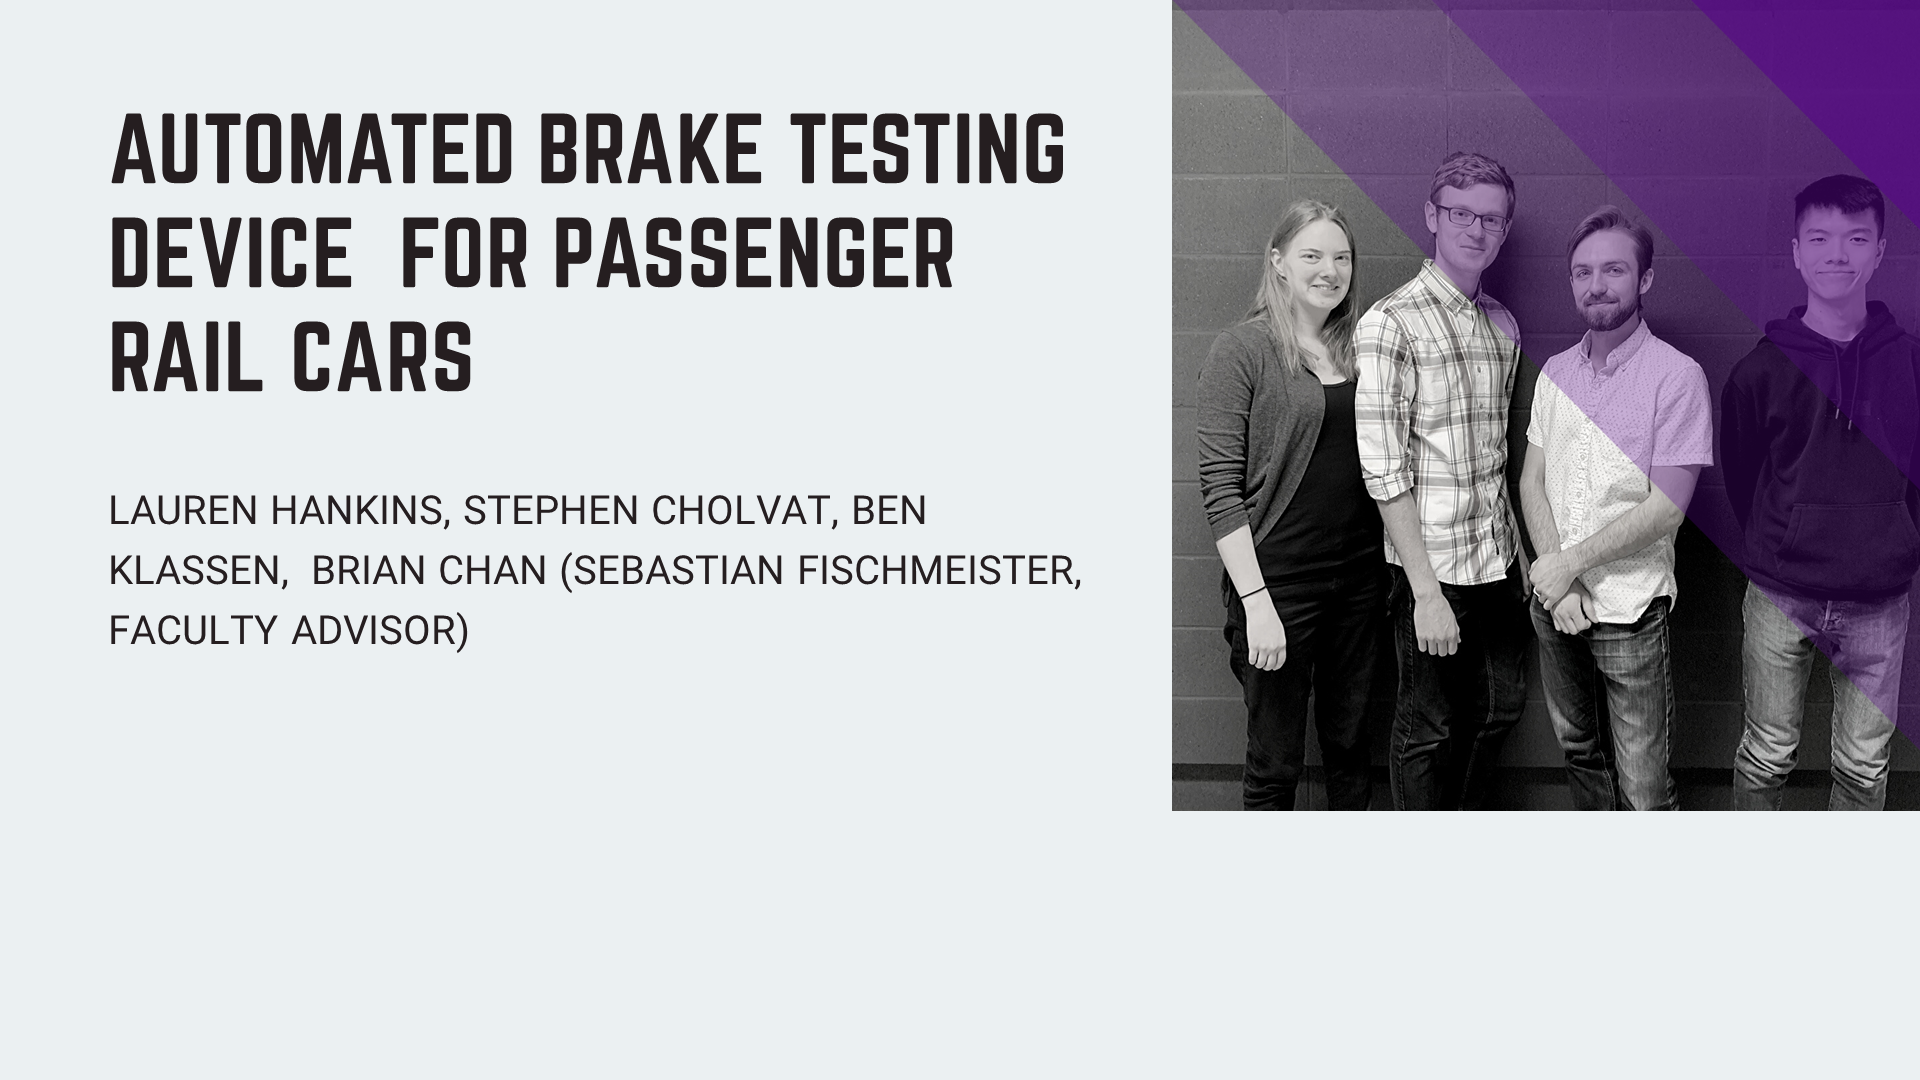 Automated Brake Testing Device for Passenger Rail Cars